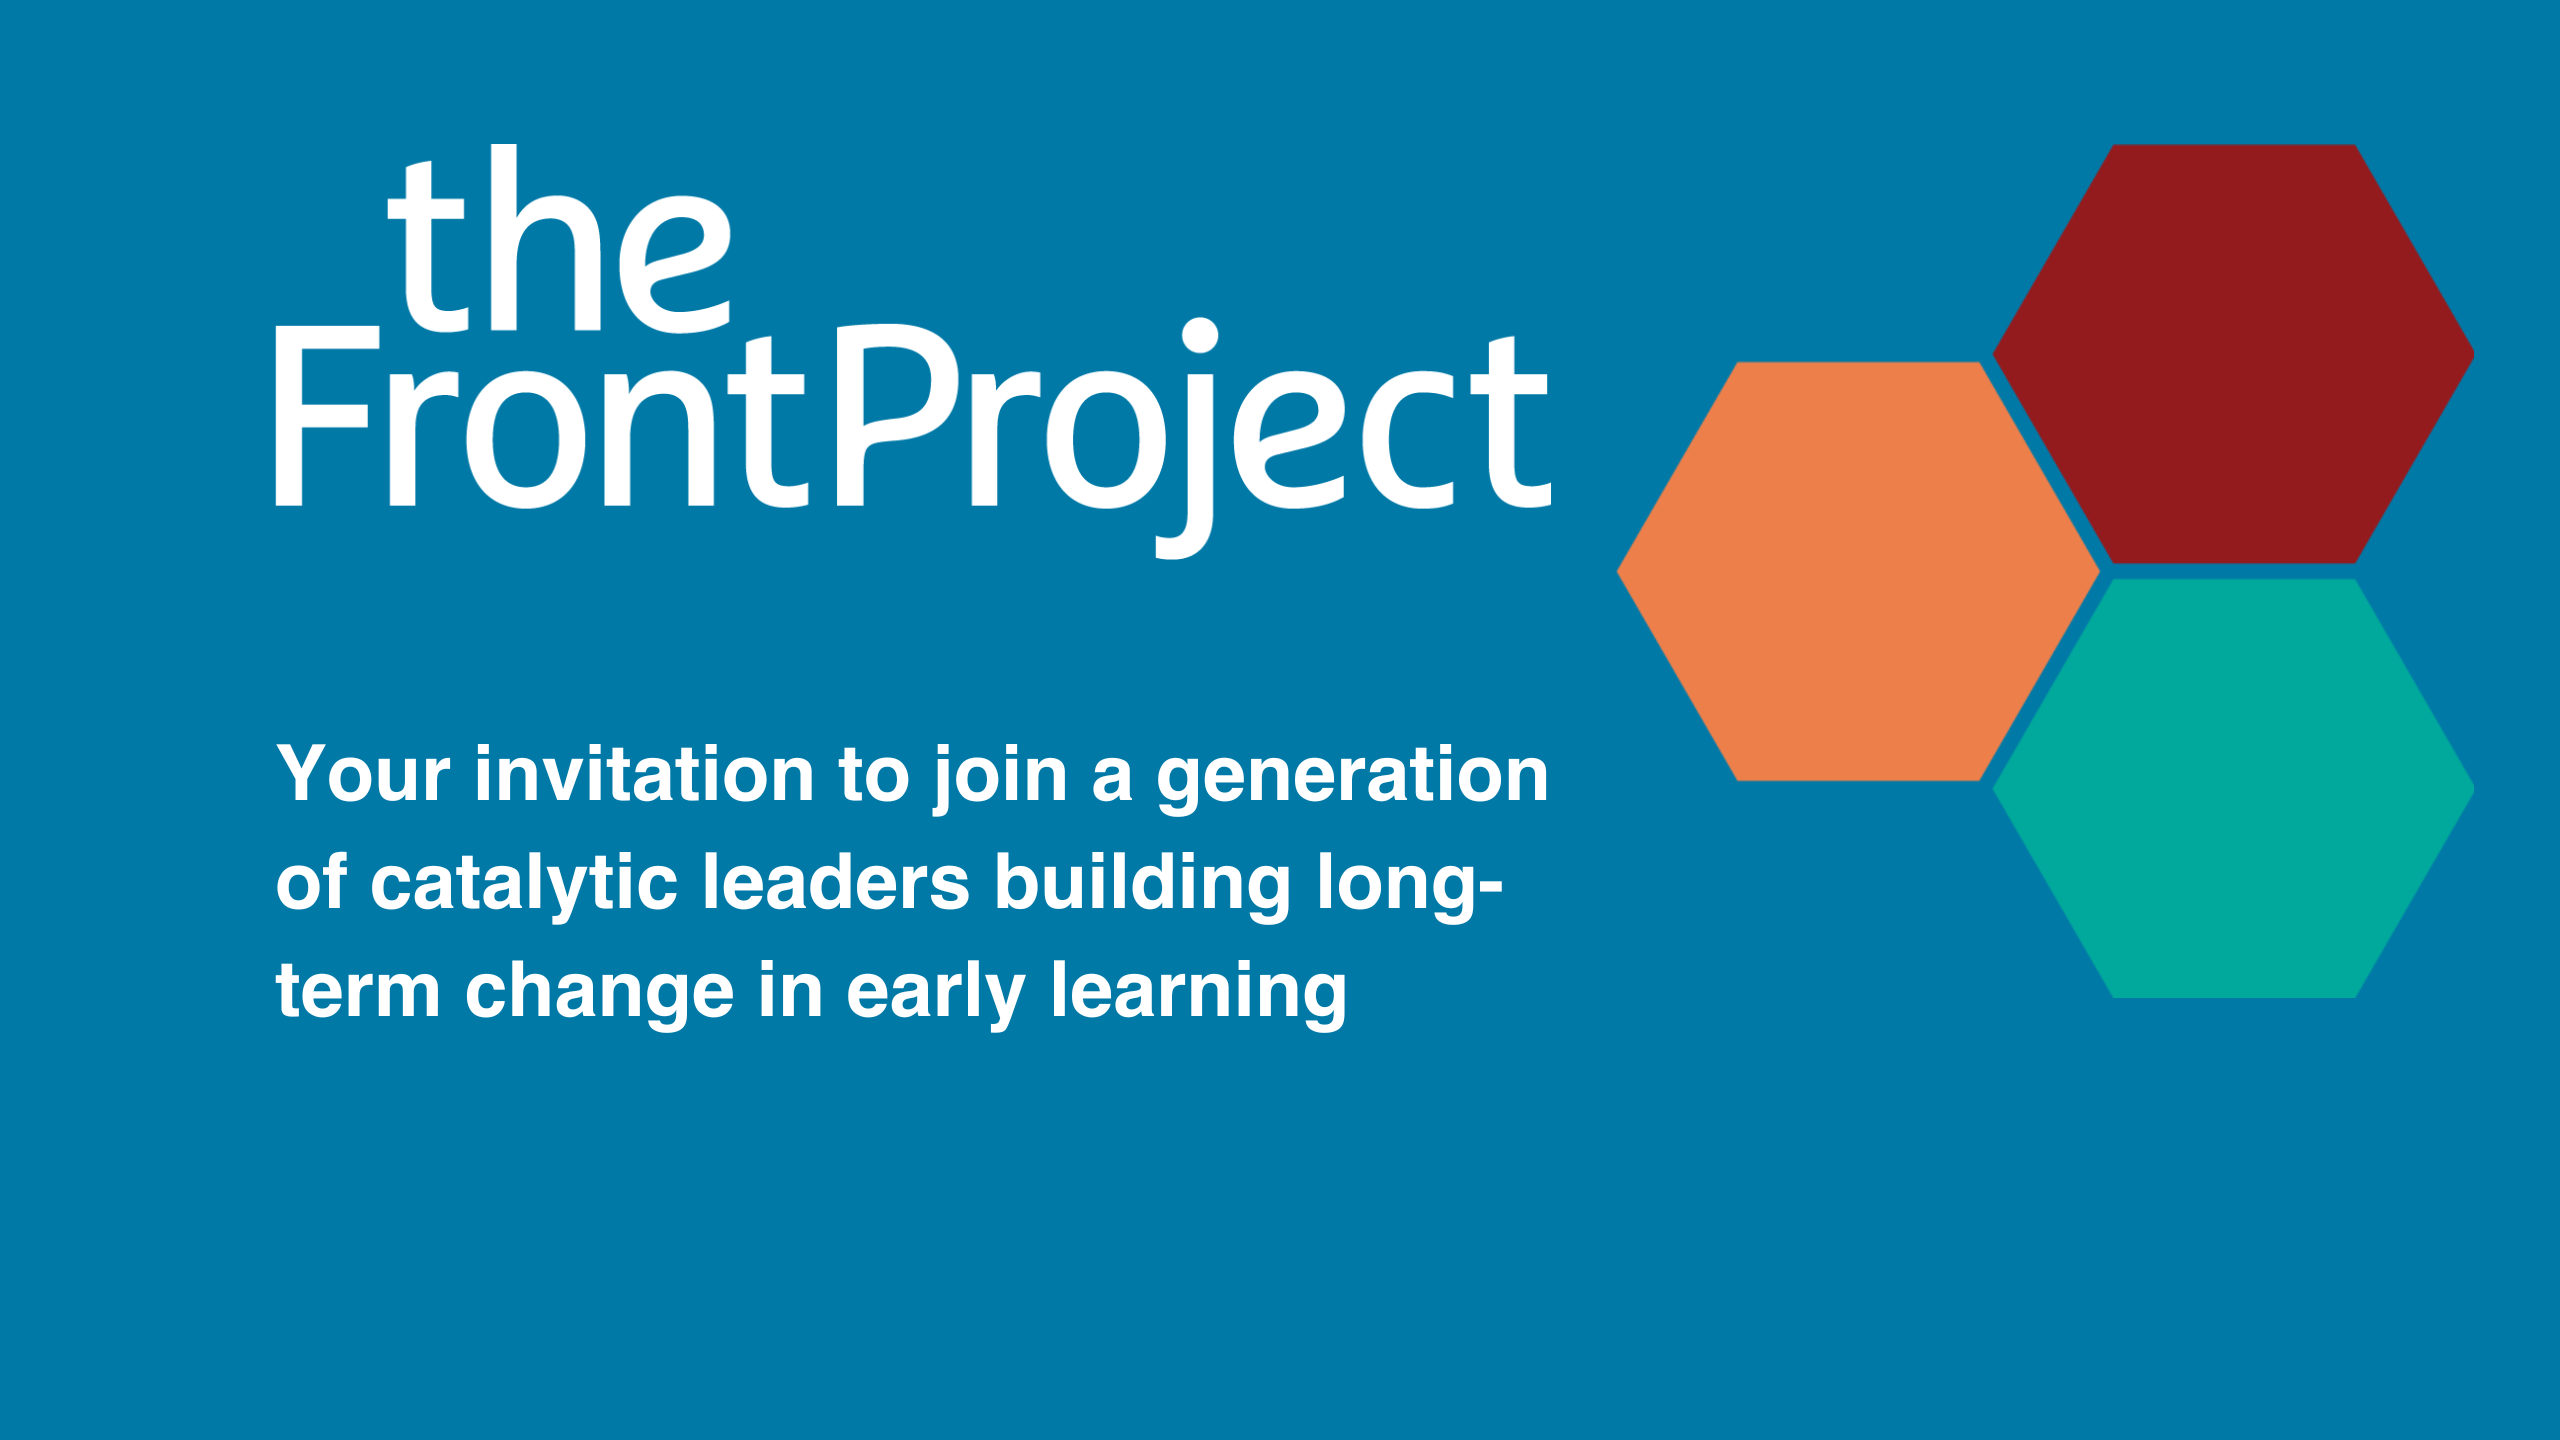 Your invitation to join a generation of catalytic leaders building long-term change in early learning 